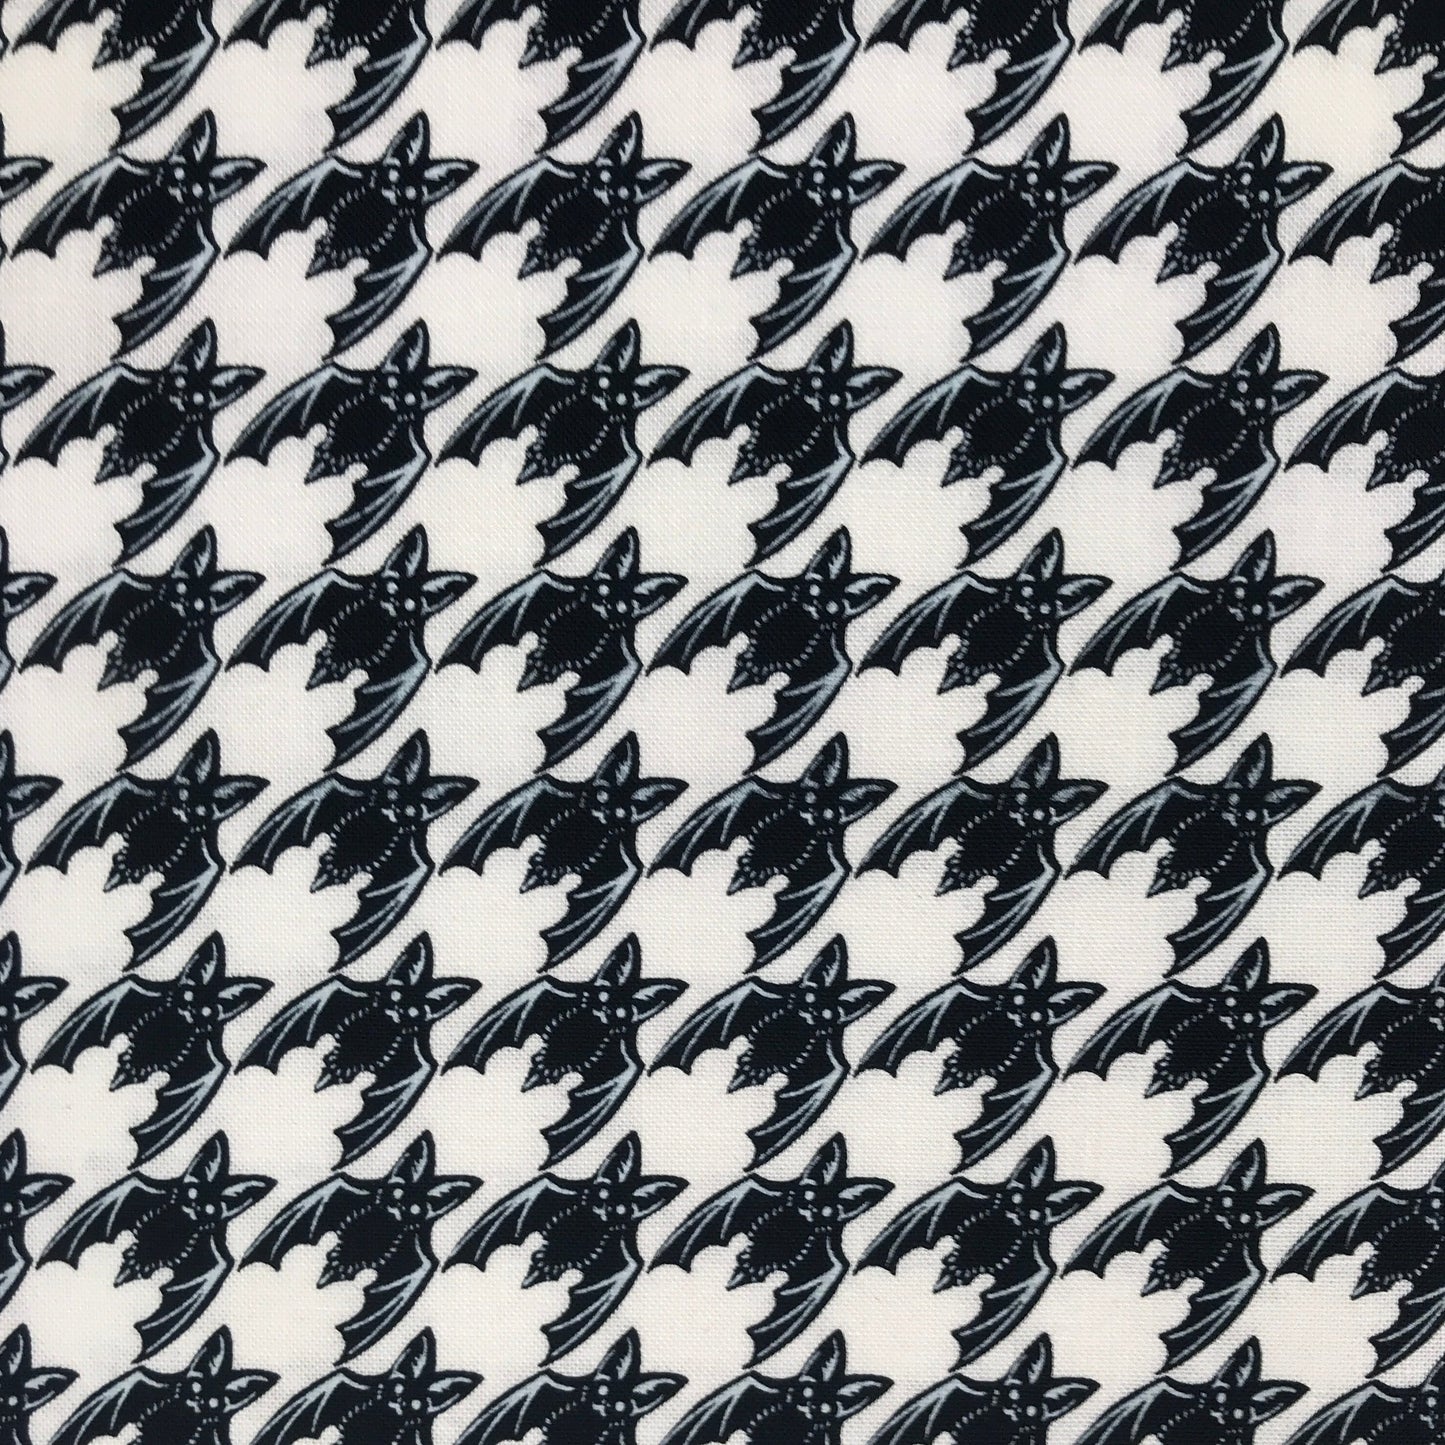 Halloween Hounds Tooth Houndstooth Bat Fabric Fetish